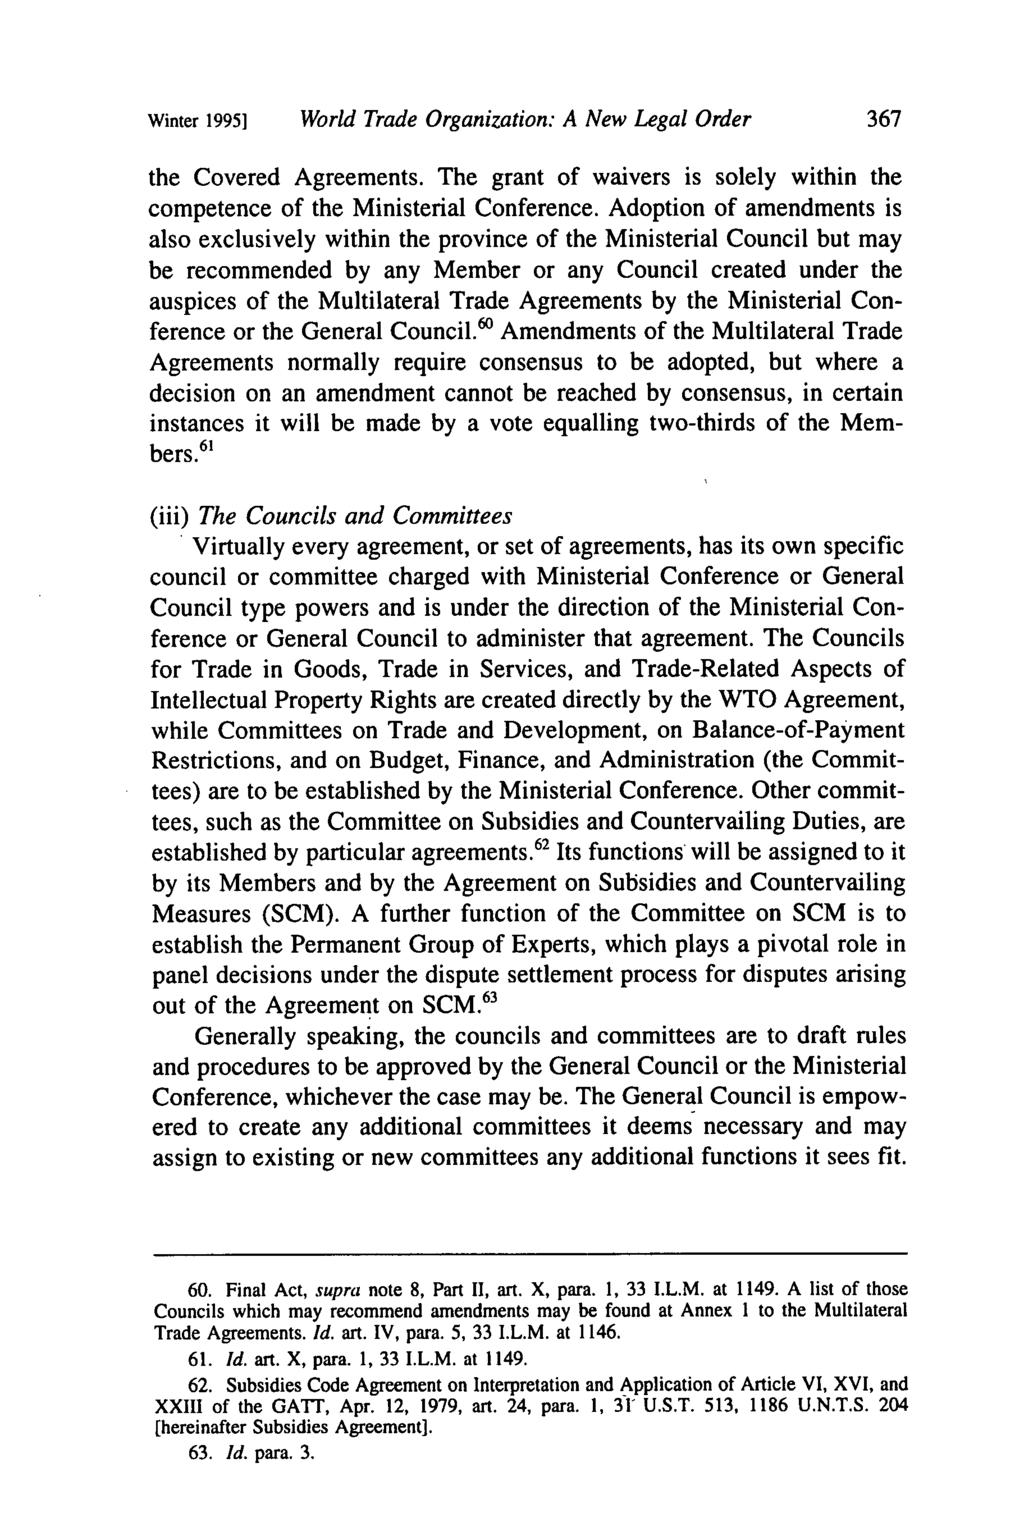 Winter 1995] World Trade Organization: A New Legal Order the Covered Agreements. The grant of waivers is solely within the competence of the Ministerial Conference.